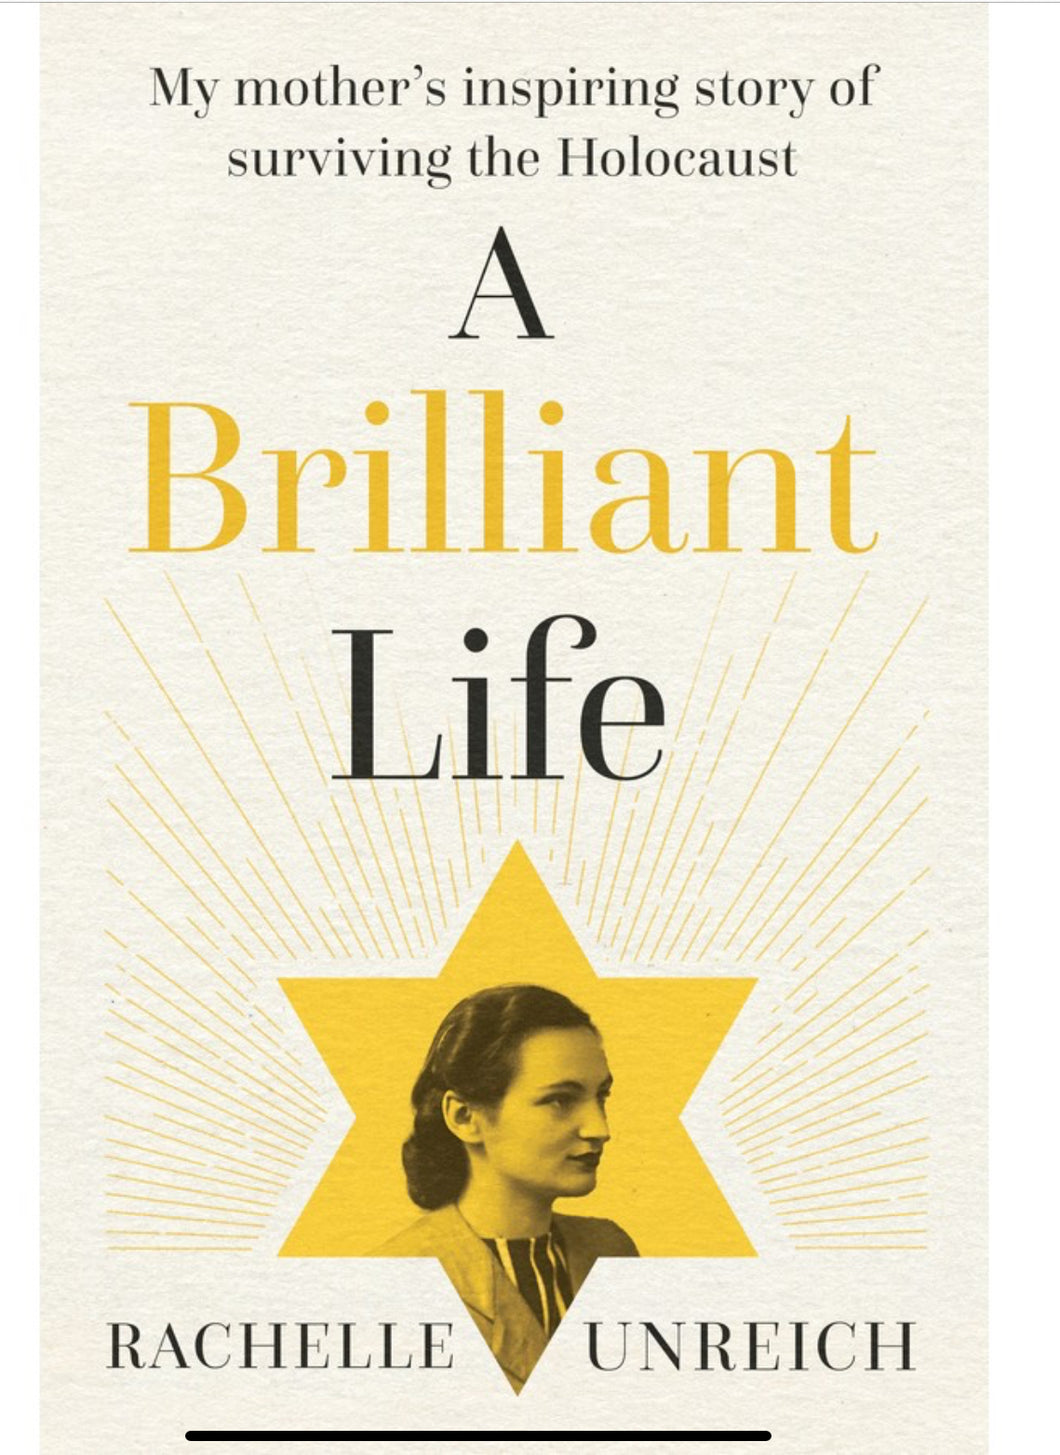 A Brilliant Life: My Mother's Inspiring Story of Surviving the Holocaust by Rachelle Unreich